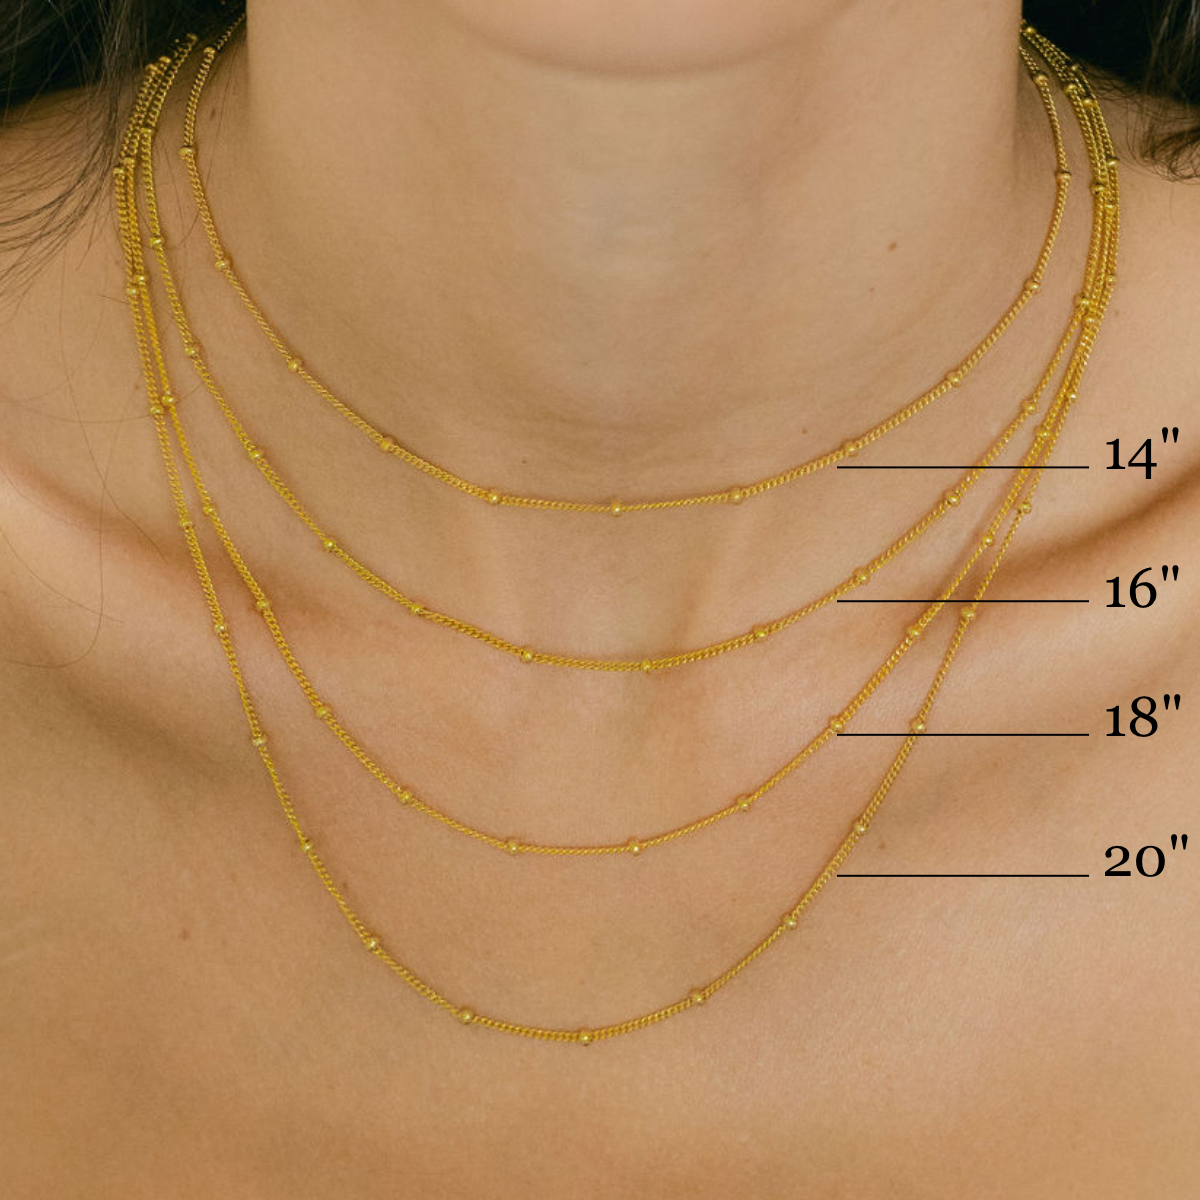 Beaded 14" Gold Chain Choker Necklace